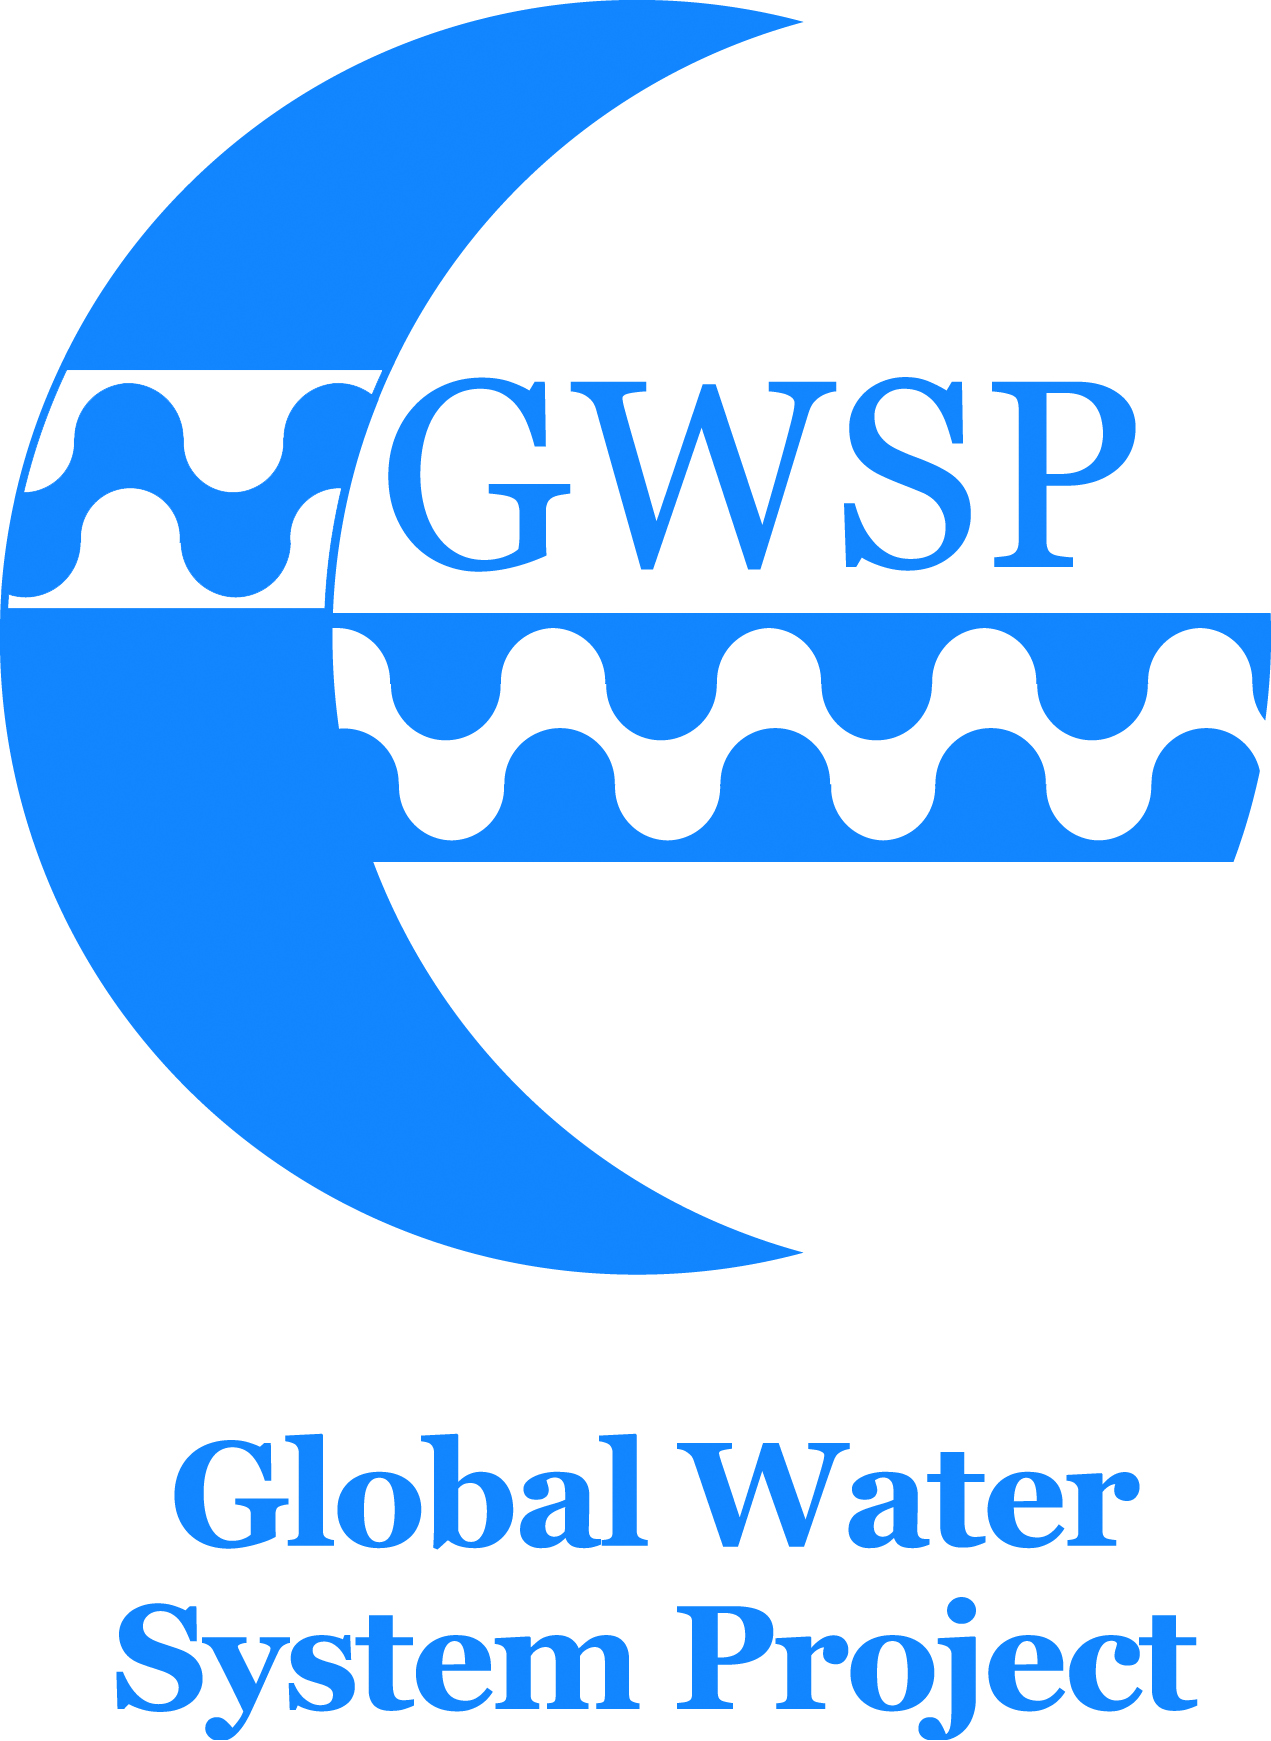 Sina Marx, Global Water System Project - Networking Officer